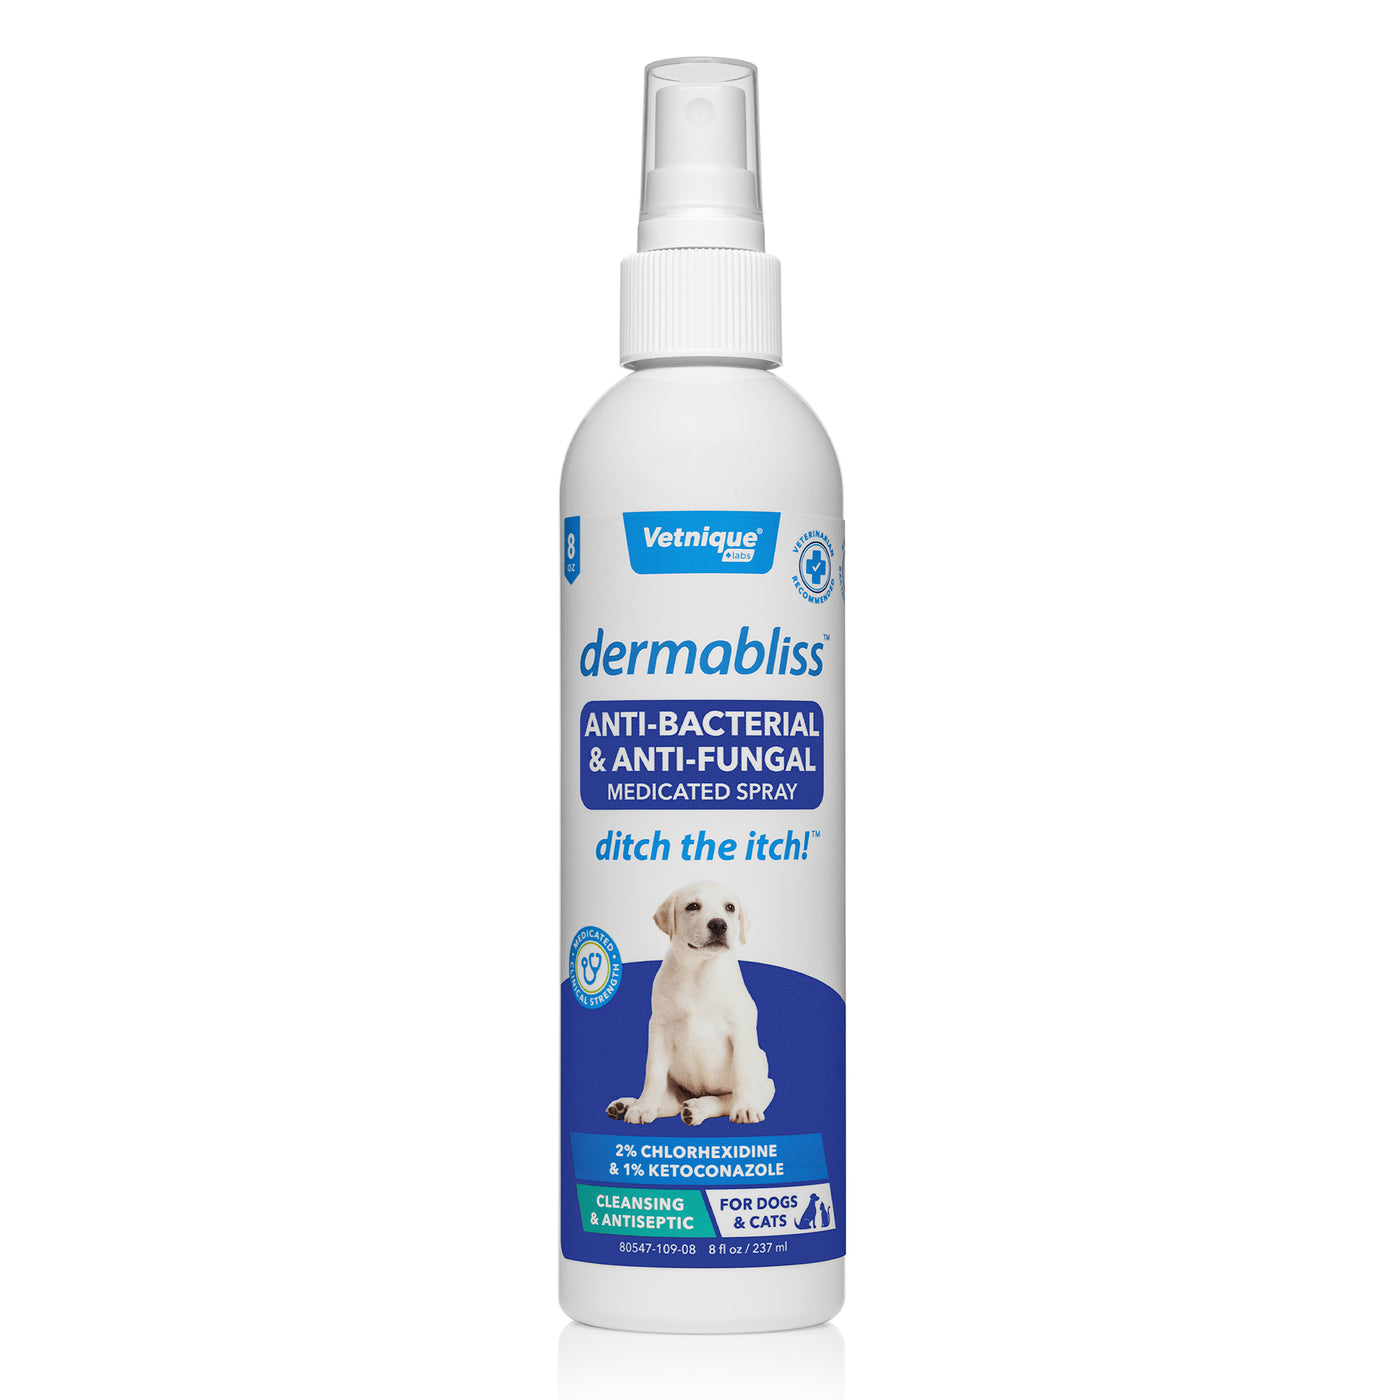 Dermabliss Anti-Bacterial and Anti-Fungal Medicated Spray